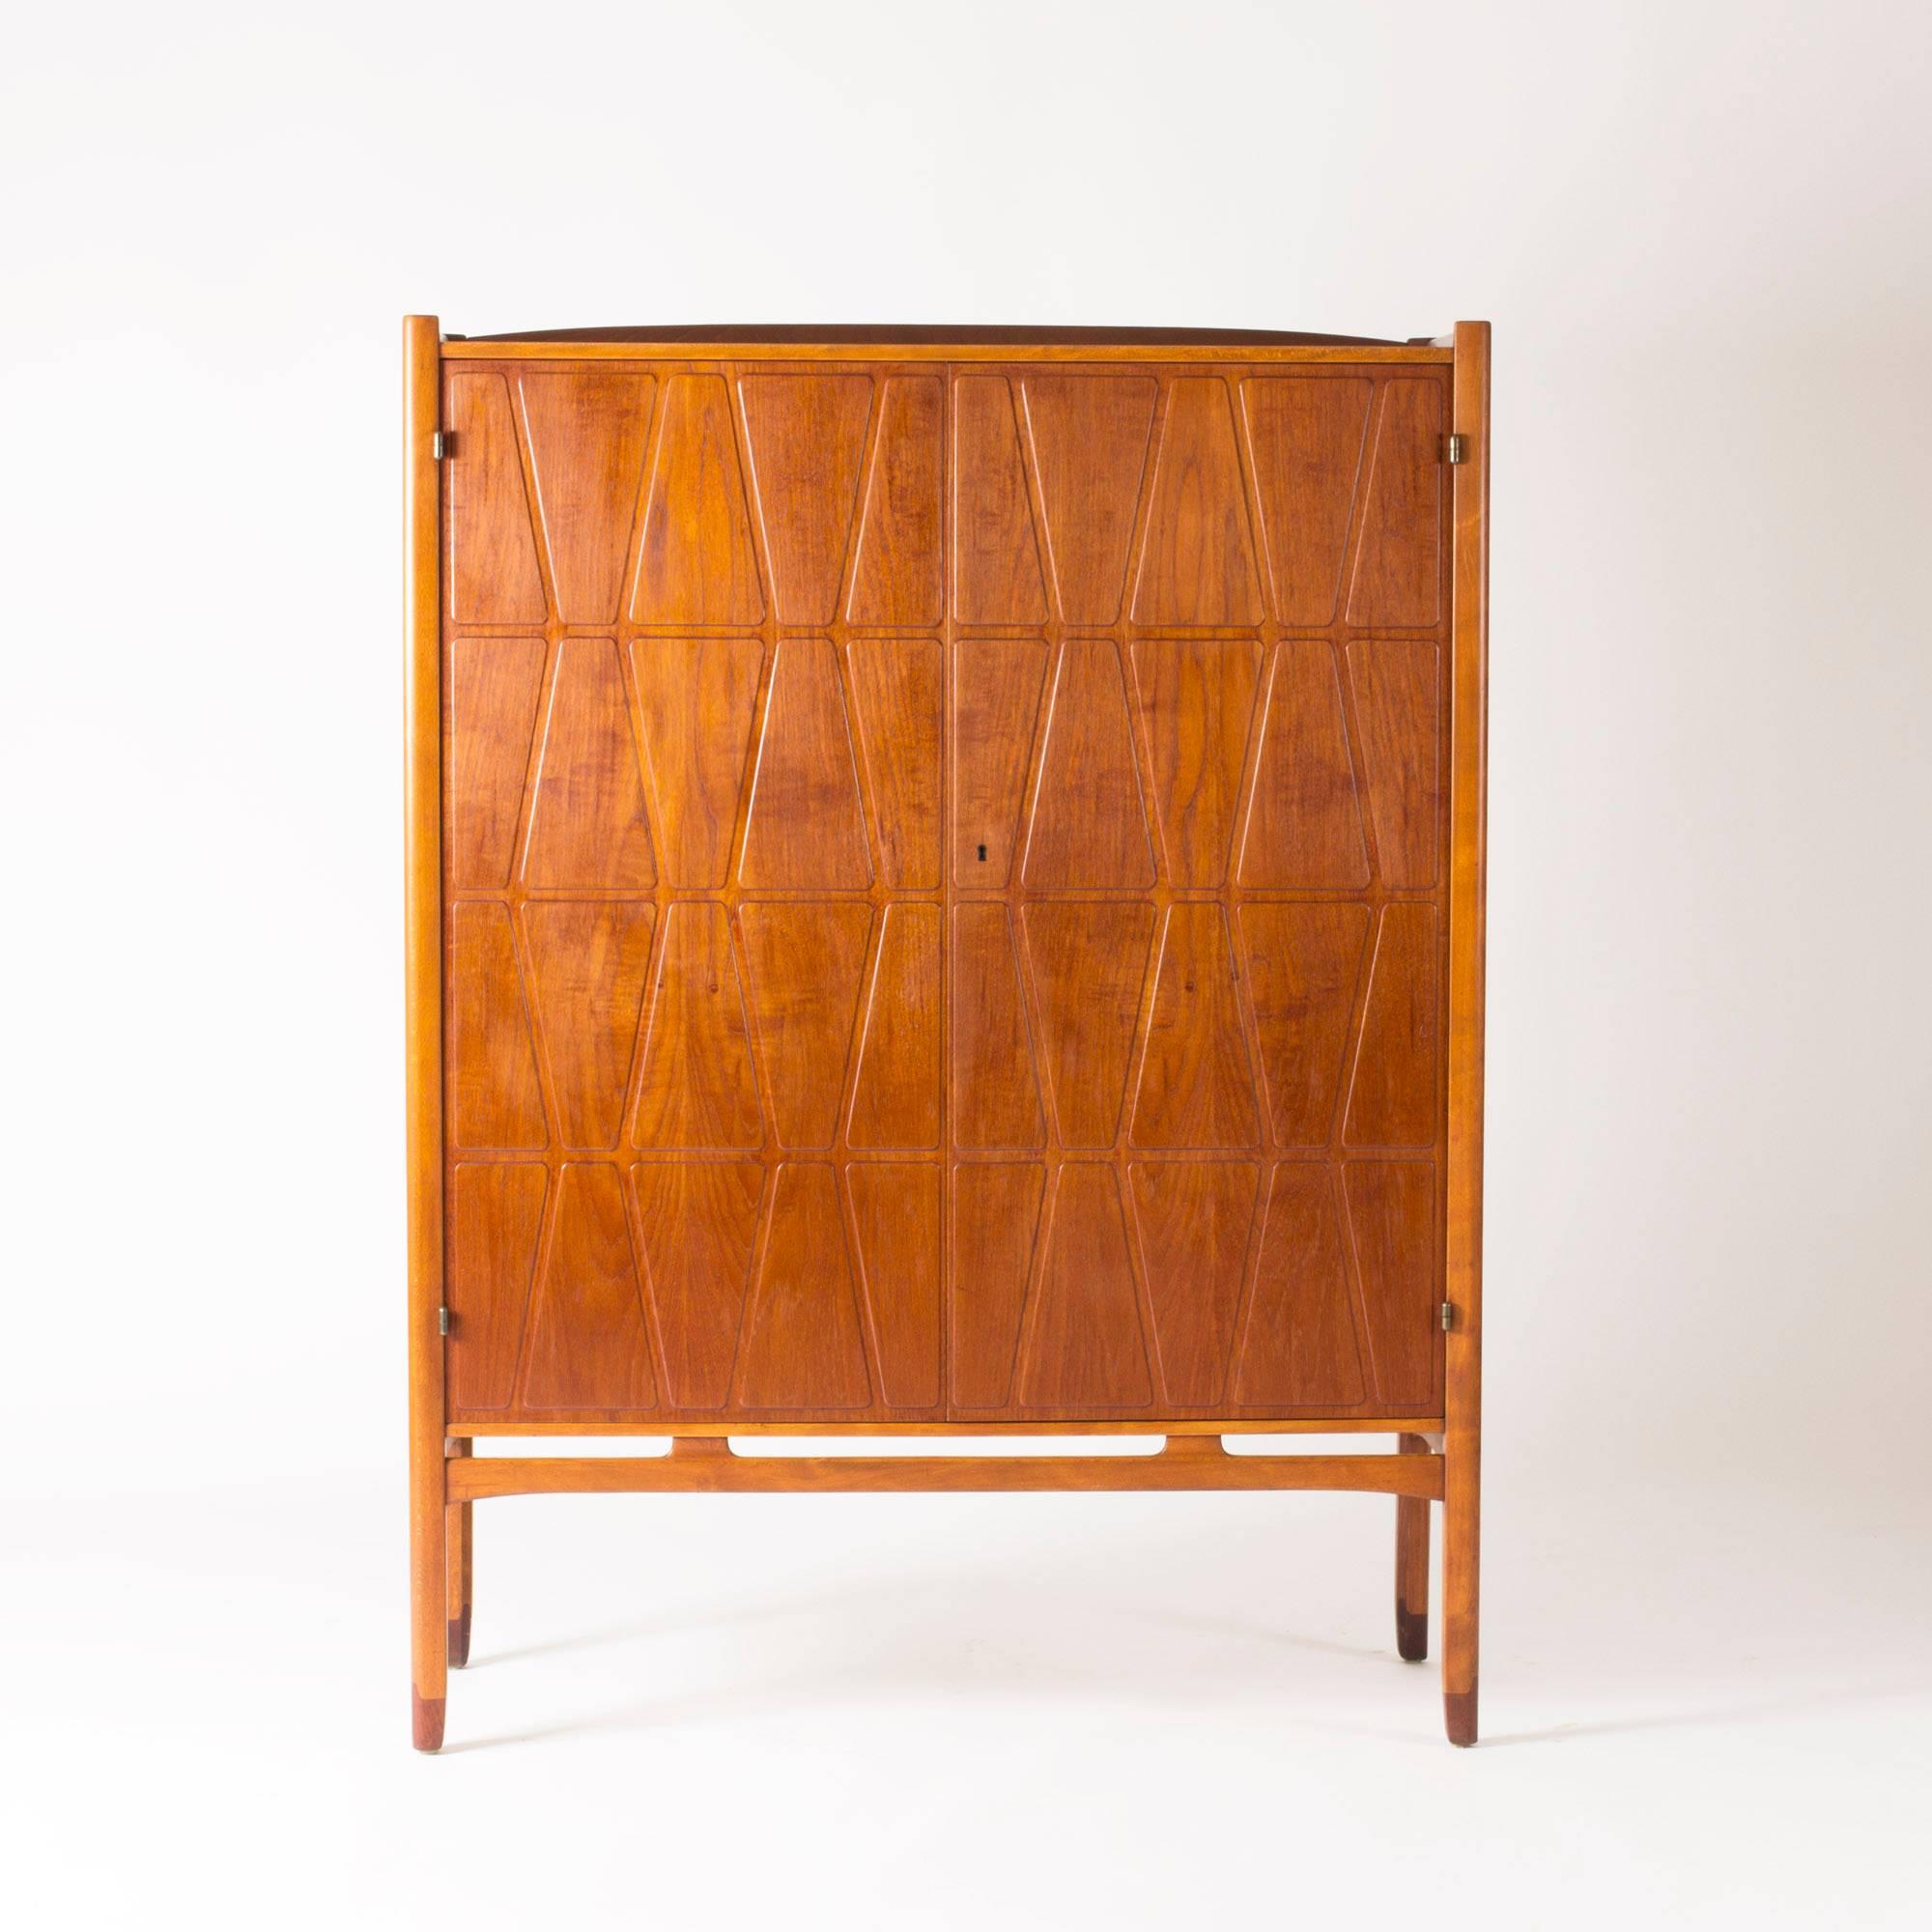 Striking “Bangkok” cabinet by Yngve Ekström, made from teak with a graphic, embossed pattern on the door fronts. Details made in beech create a subtle contrast.